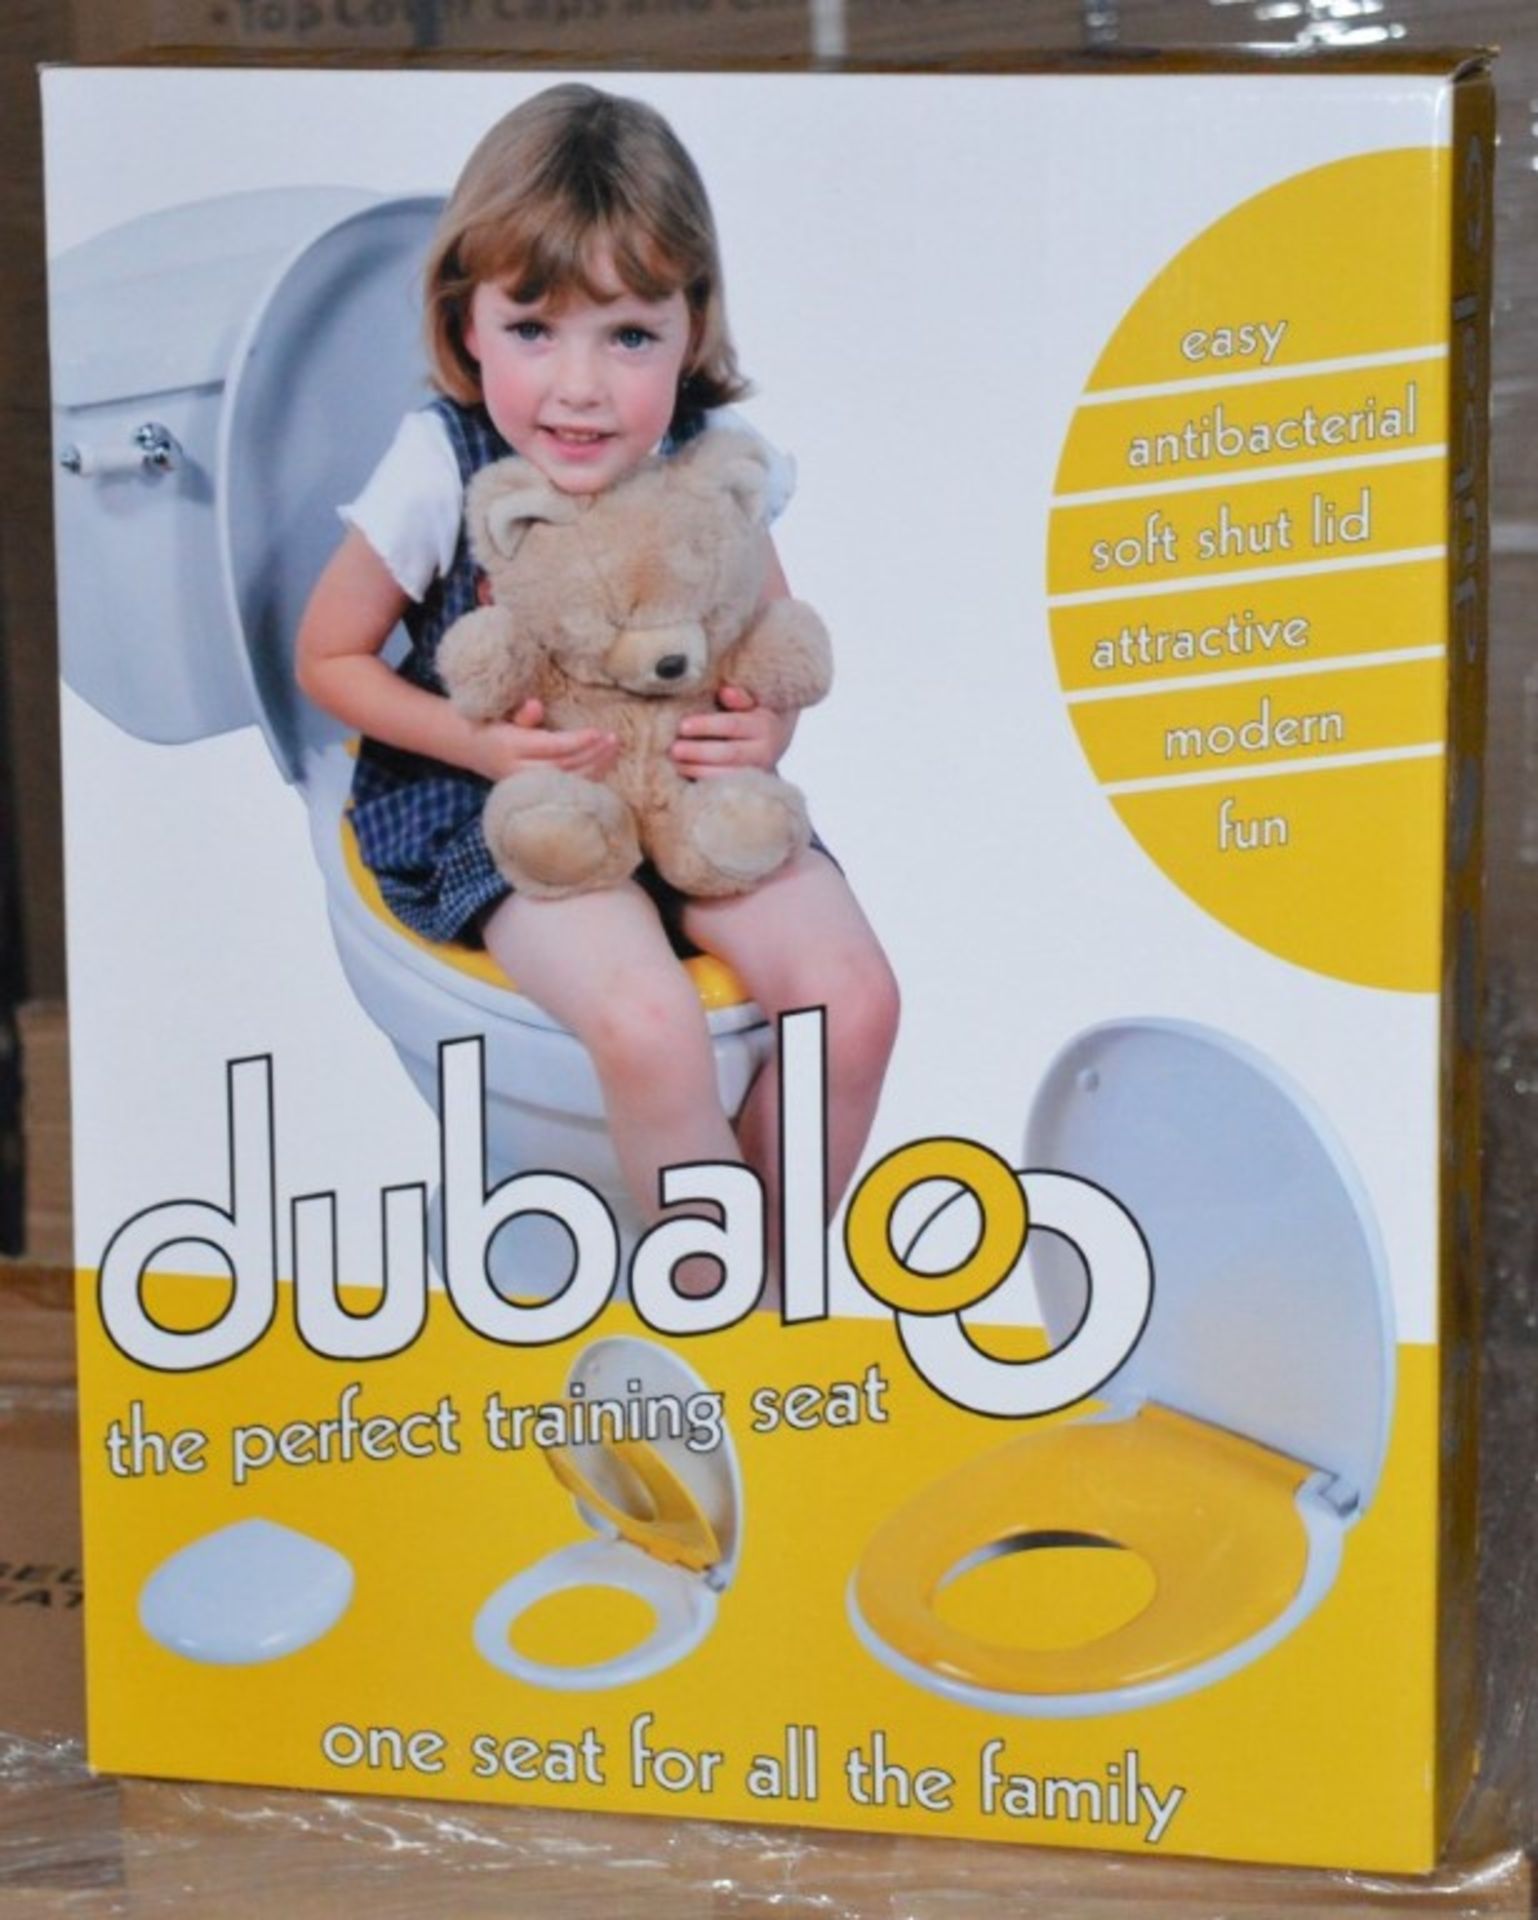 5 x Dubaloo 2 in 1 Family Training Toilet Seats - One Seat For All The Family - Full Size Toilet - Image 4 of 6